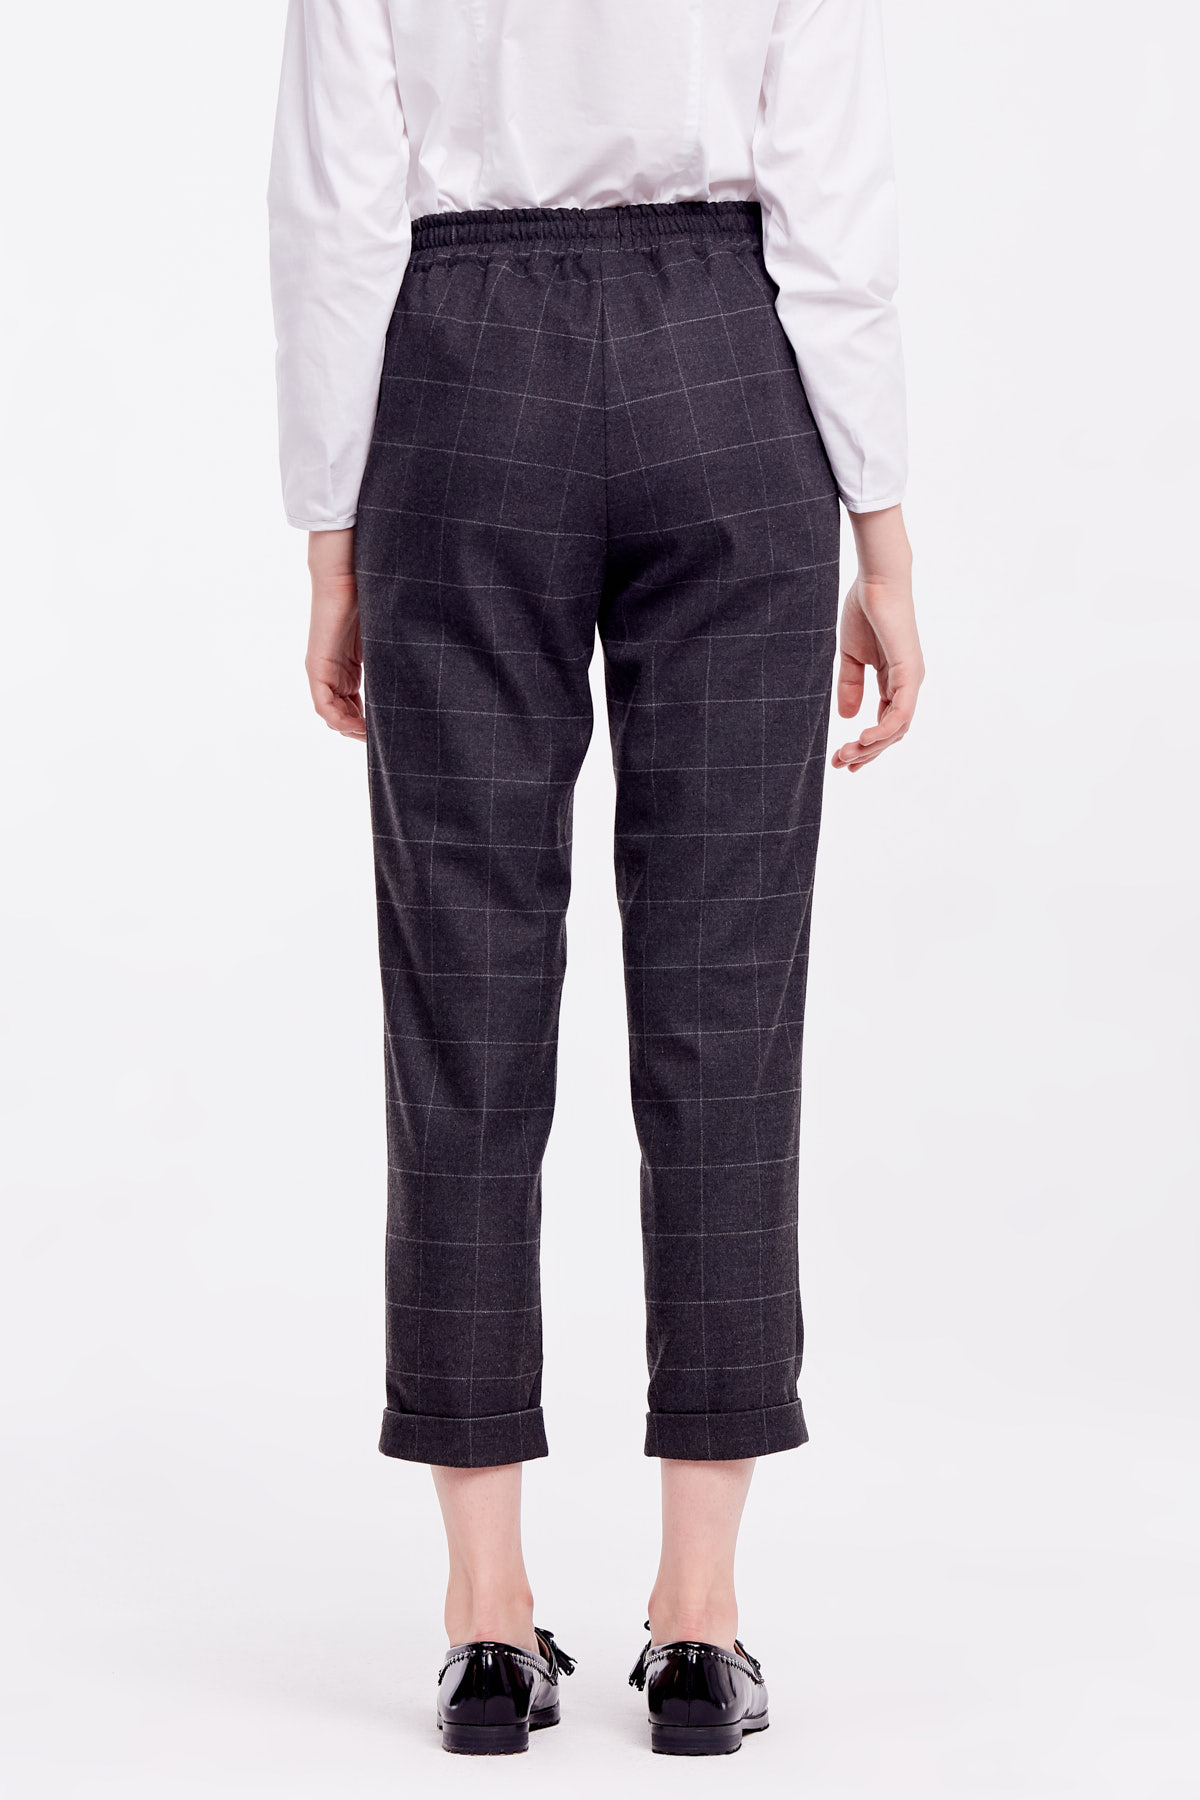 Loose grey checkered pants with cuffs, photo 6